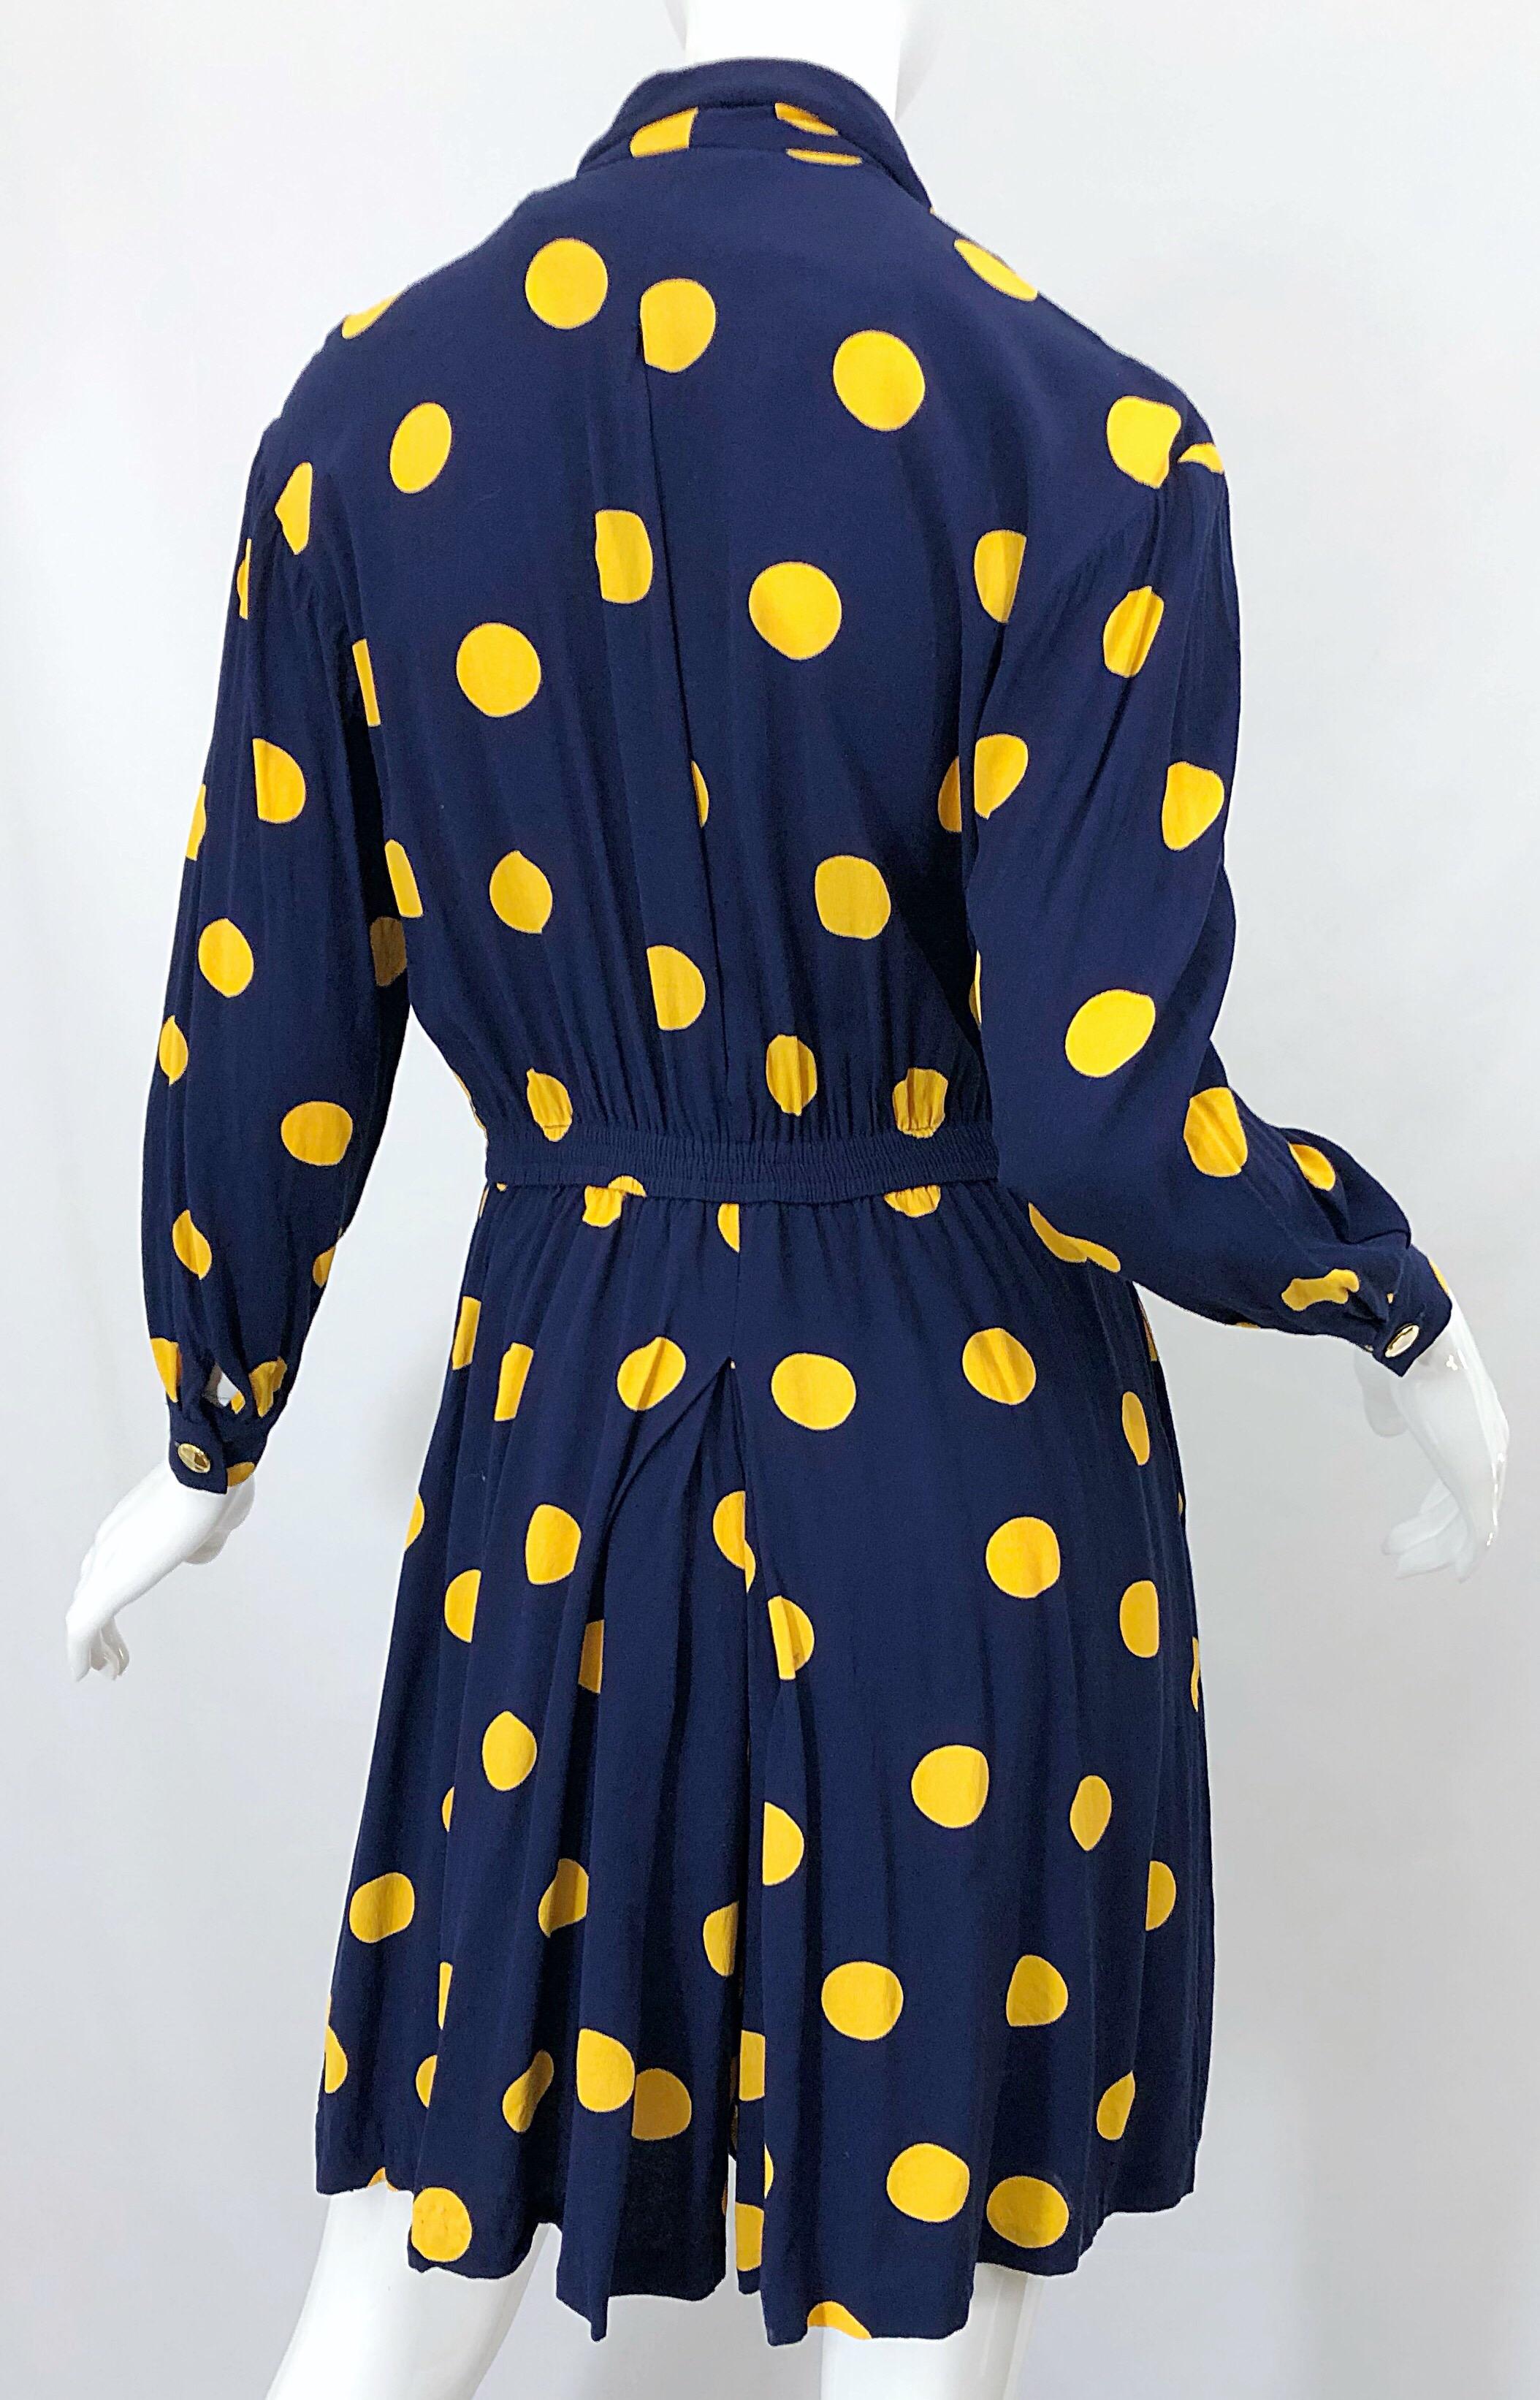 Size 8 Romper Late 1980s Navy Blue and Yellow Polka Dot 80s Vintage Romper 8